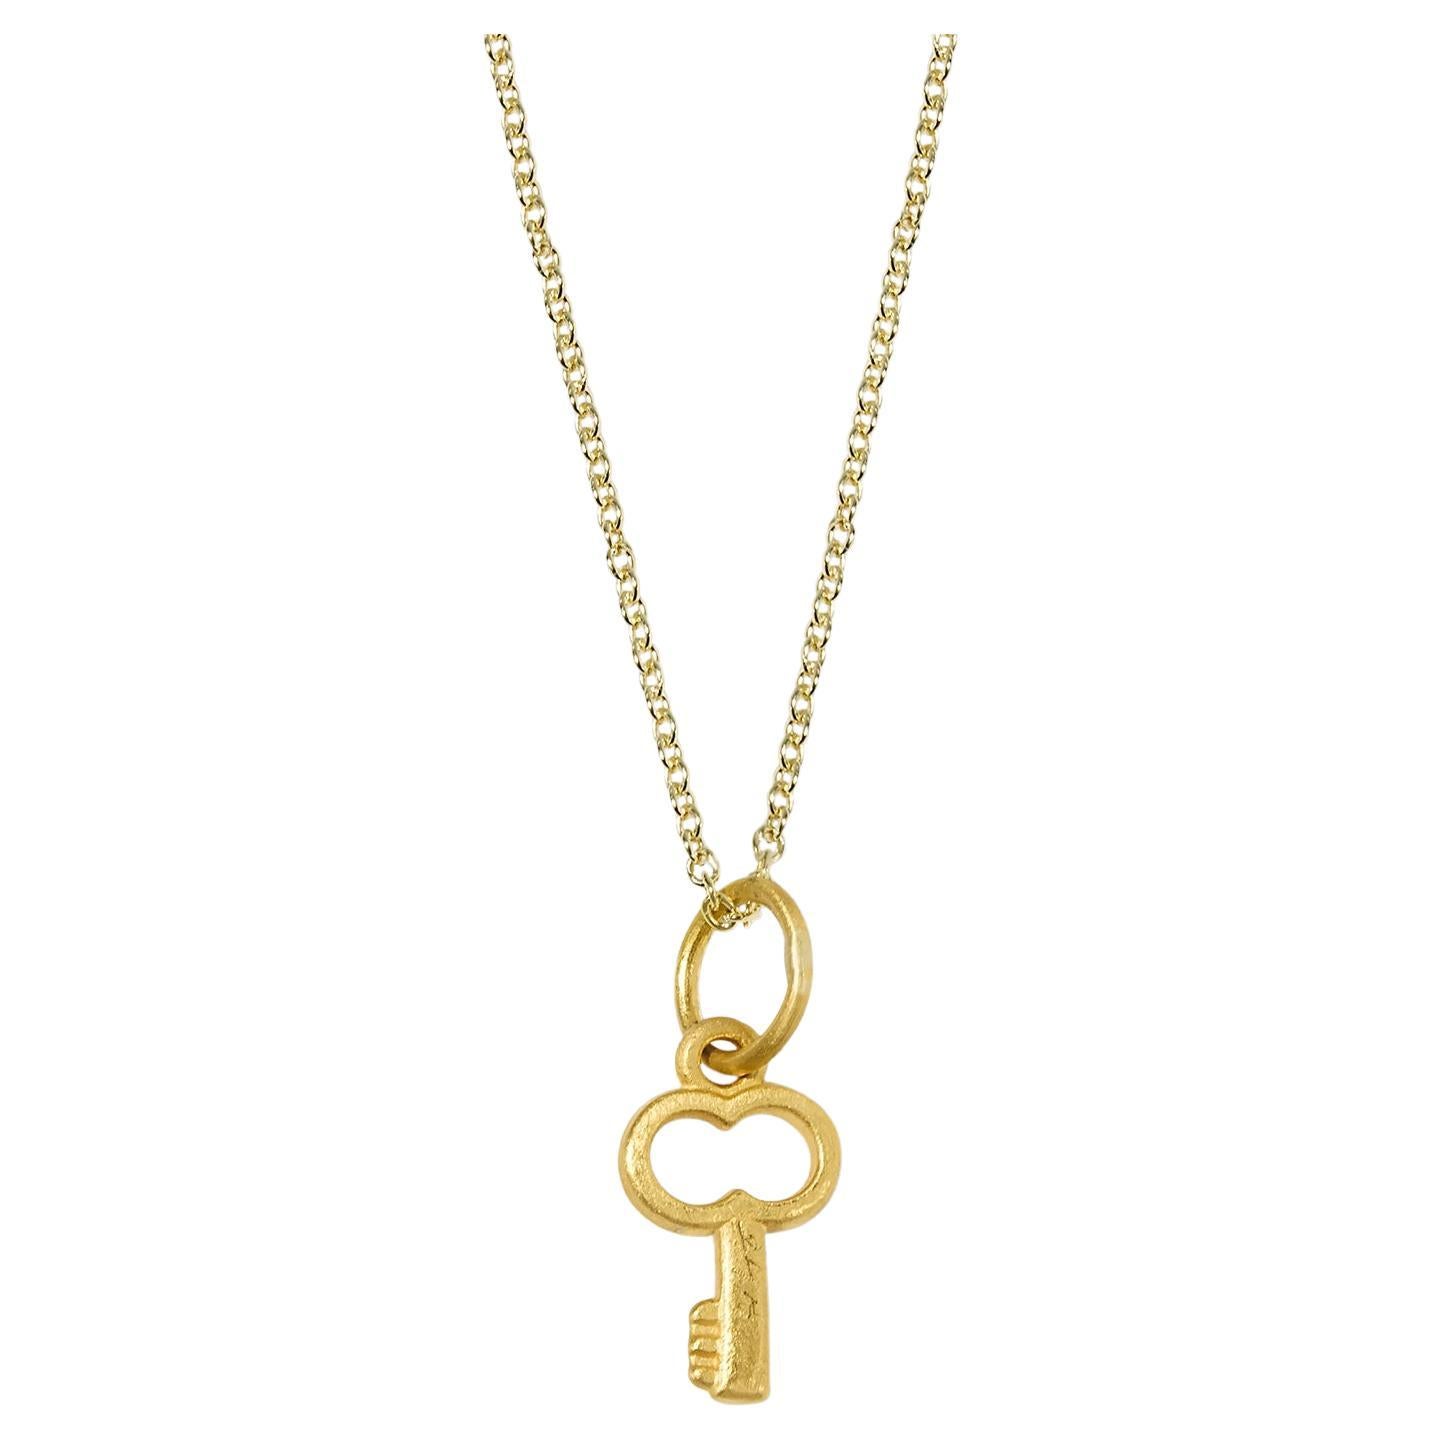 Miniature Key Charm Pendant Necklace, 24kt Solid Gold For Sale